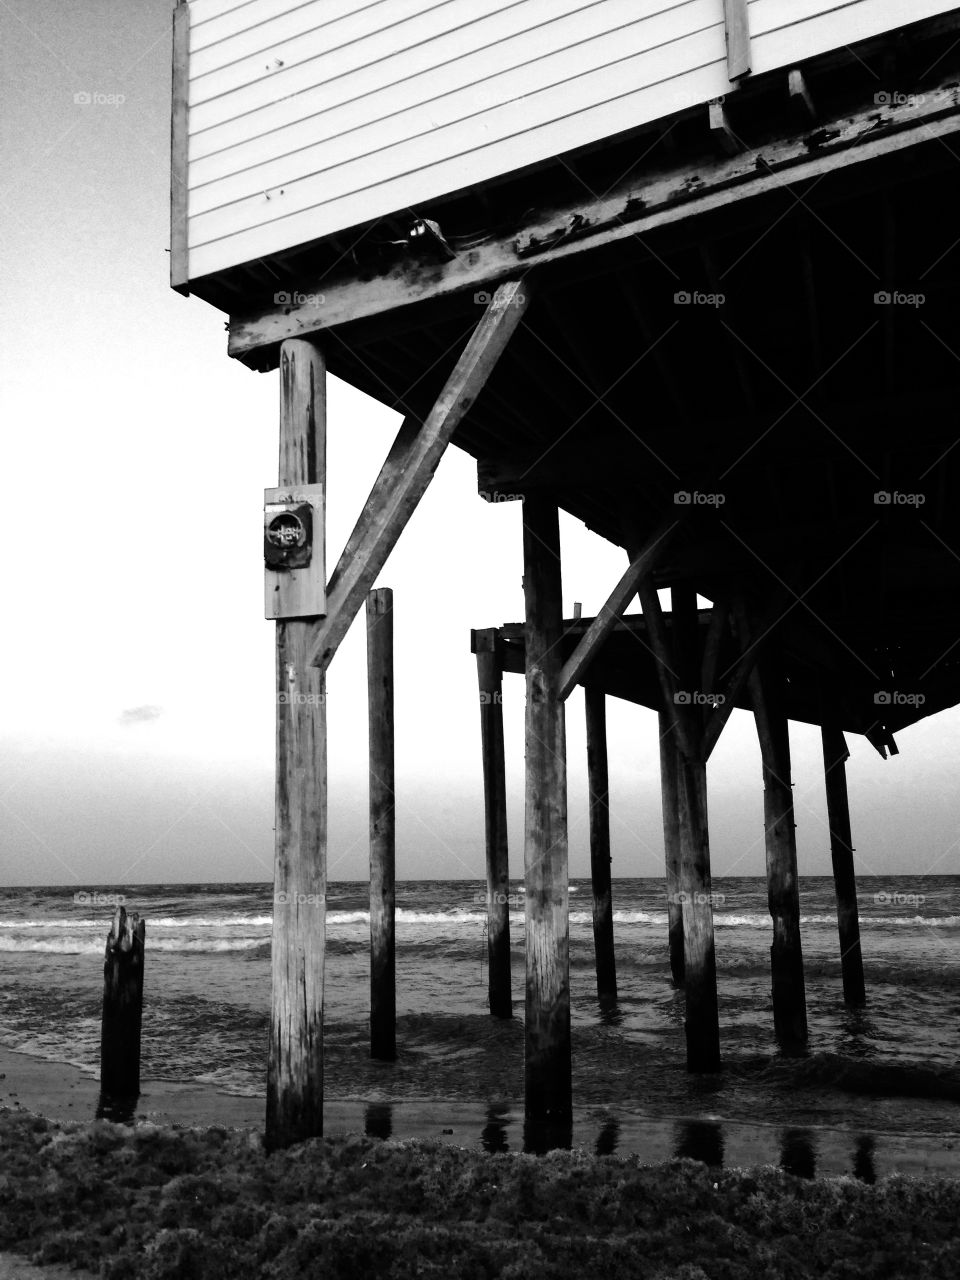 After several hurricanes in south Texas, Surfside Beach had a few houses left standing in the surf. They are quite creepy and it's as if they are just waiting for their fate, will they be torn down by the city or will a hurricane finish them off 